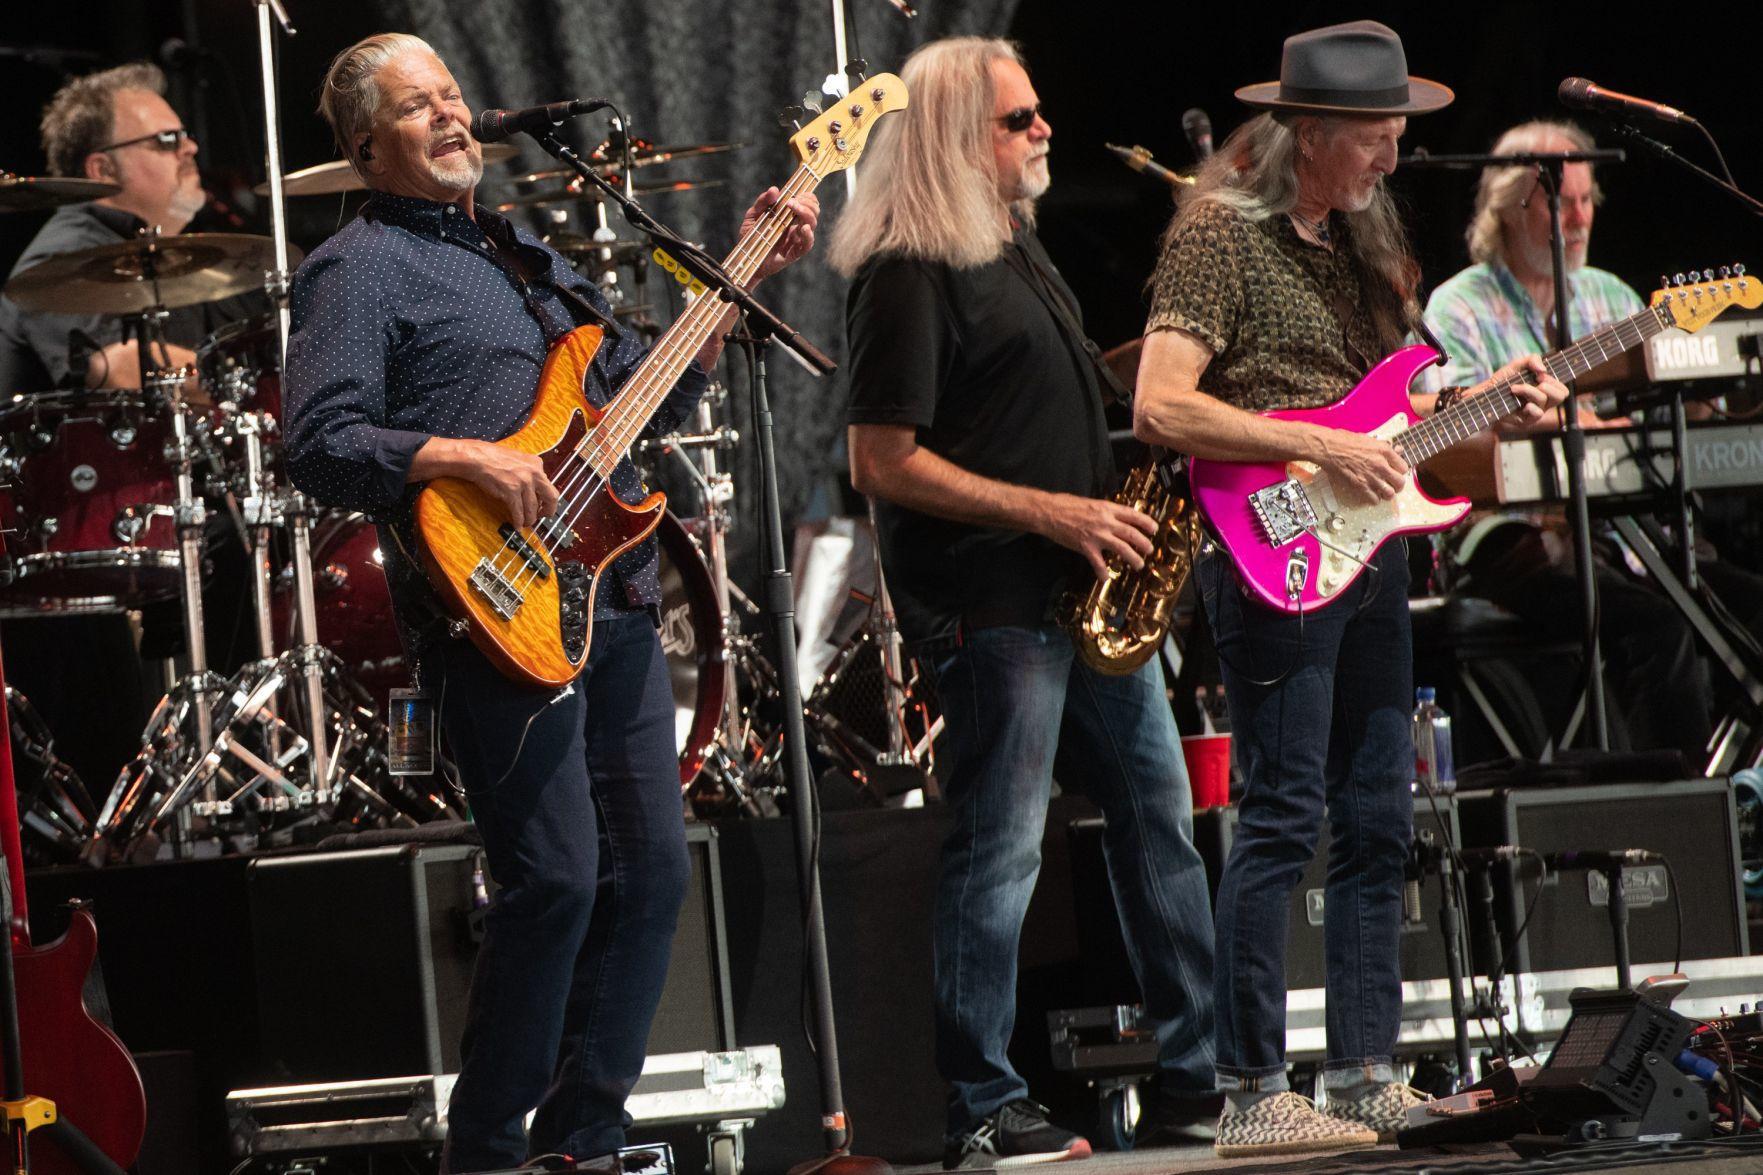 Rescheduled for 2021 The Doobie Brothers' 50th Anniversary Tour with